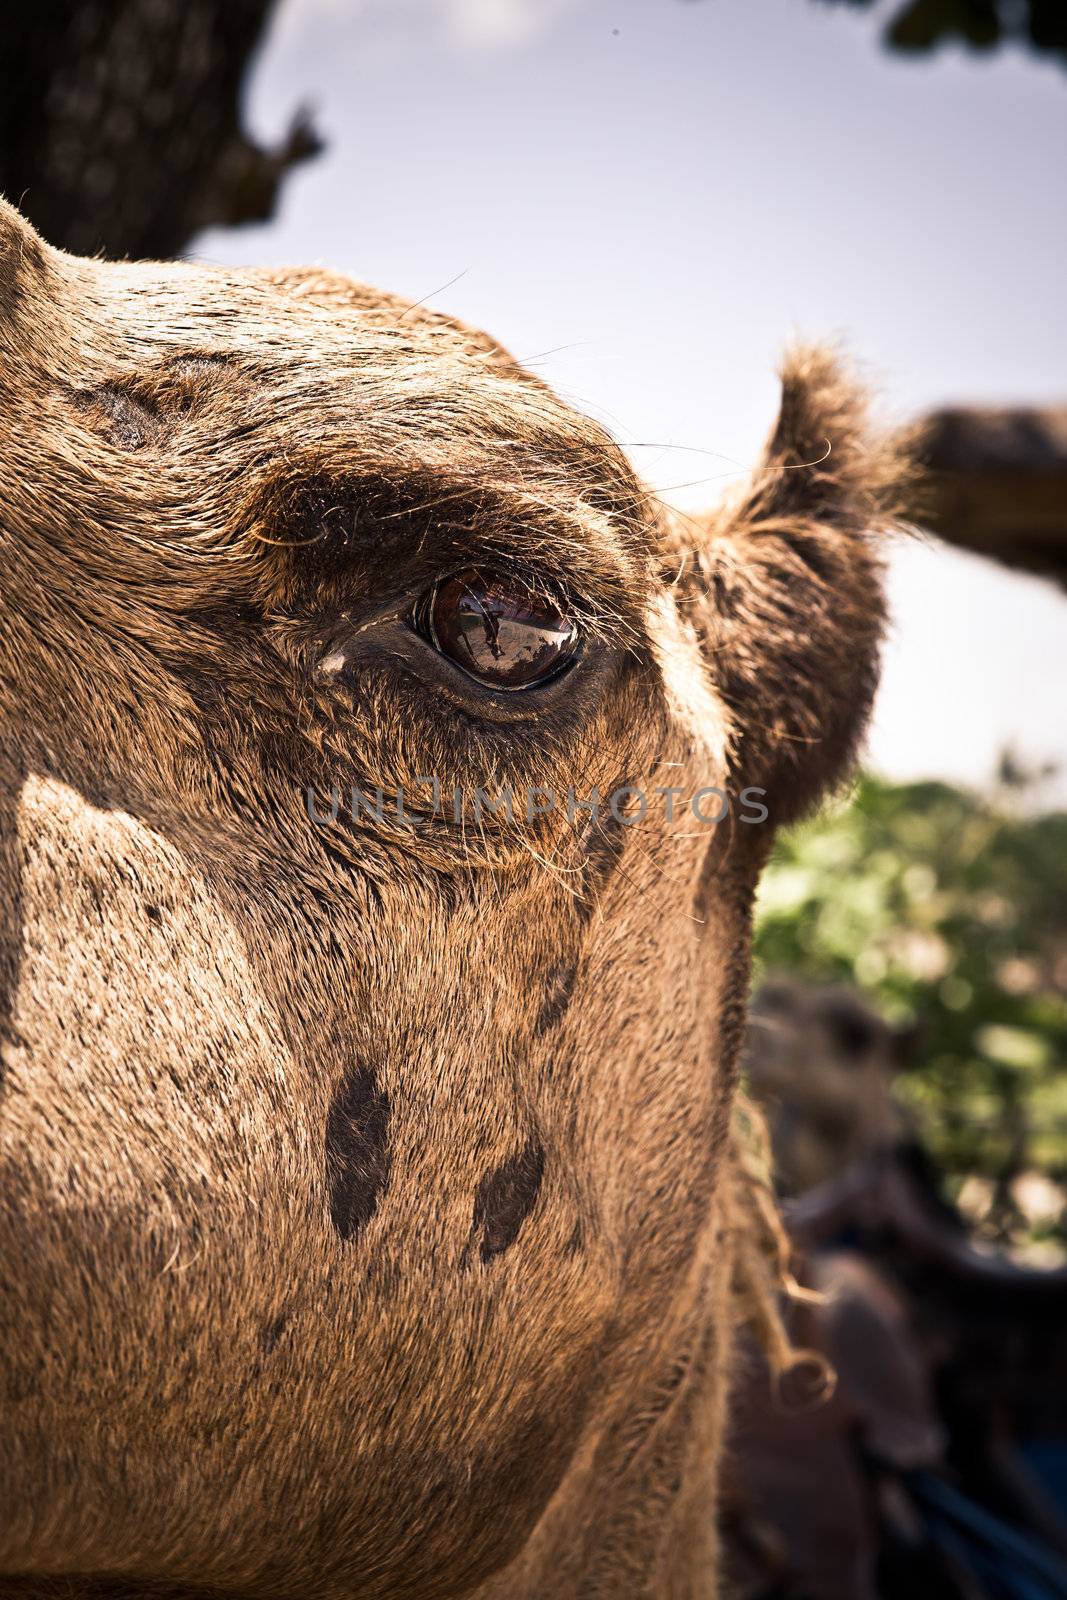 Closeup detail of the eye of a camel looking at the camera showing the texture of the hair outdoors on a sunny day